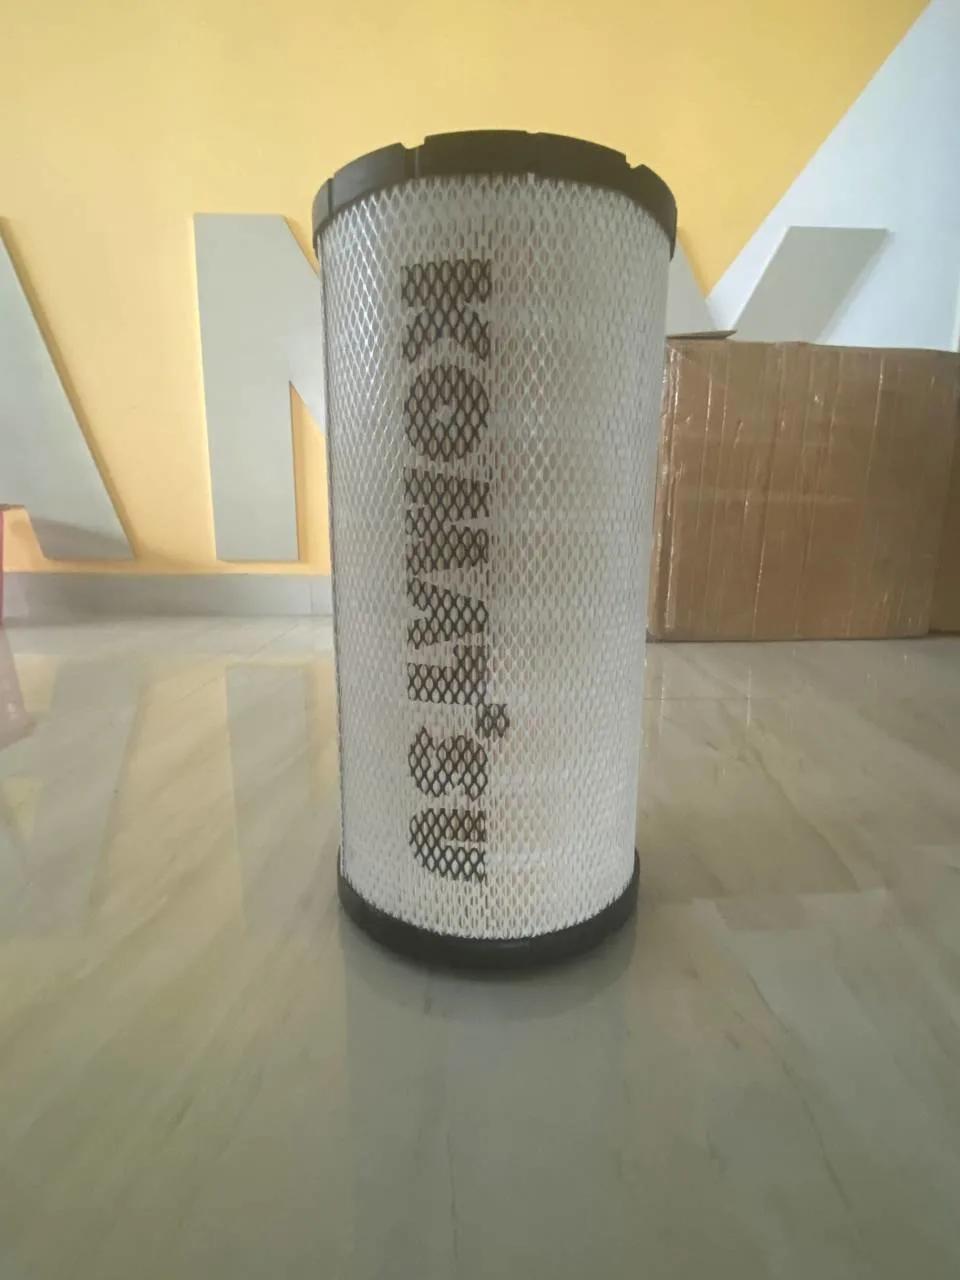 PC200-7 PC200-8 Excavator Air Cleaner Element Filter Ass′y 6001-85-3100 600-185-3100